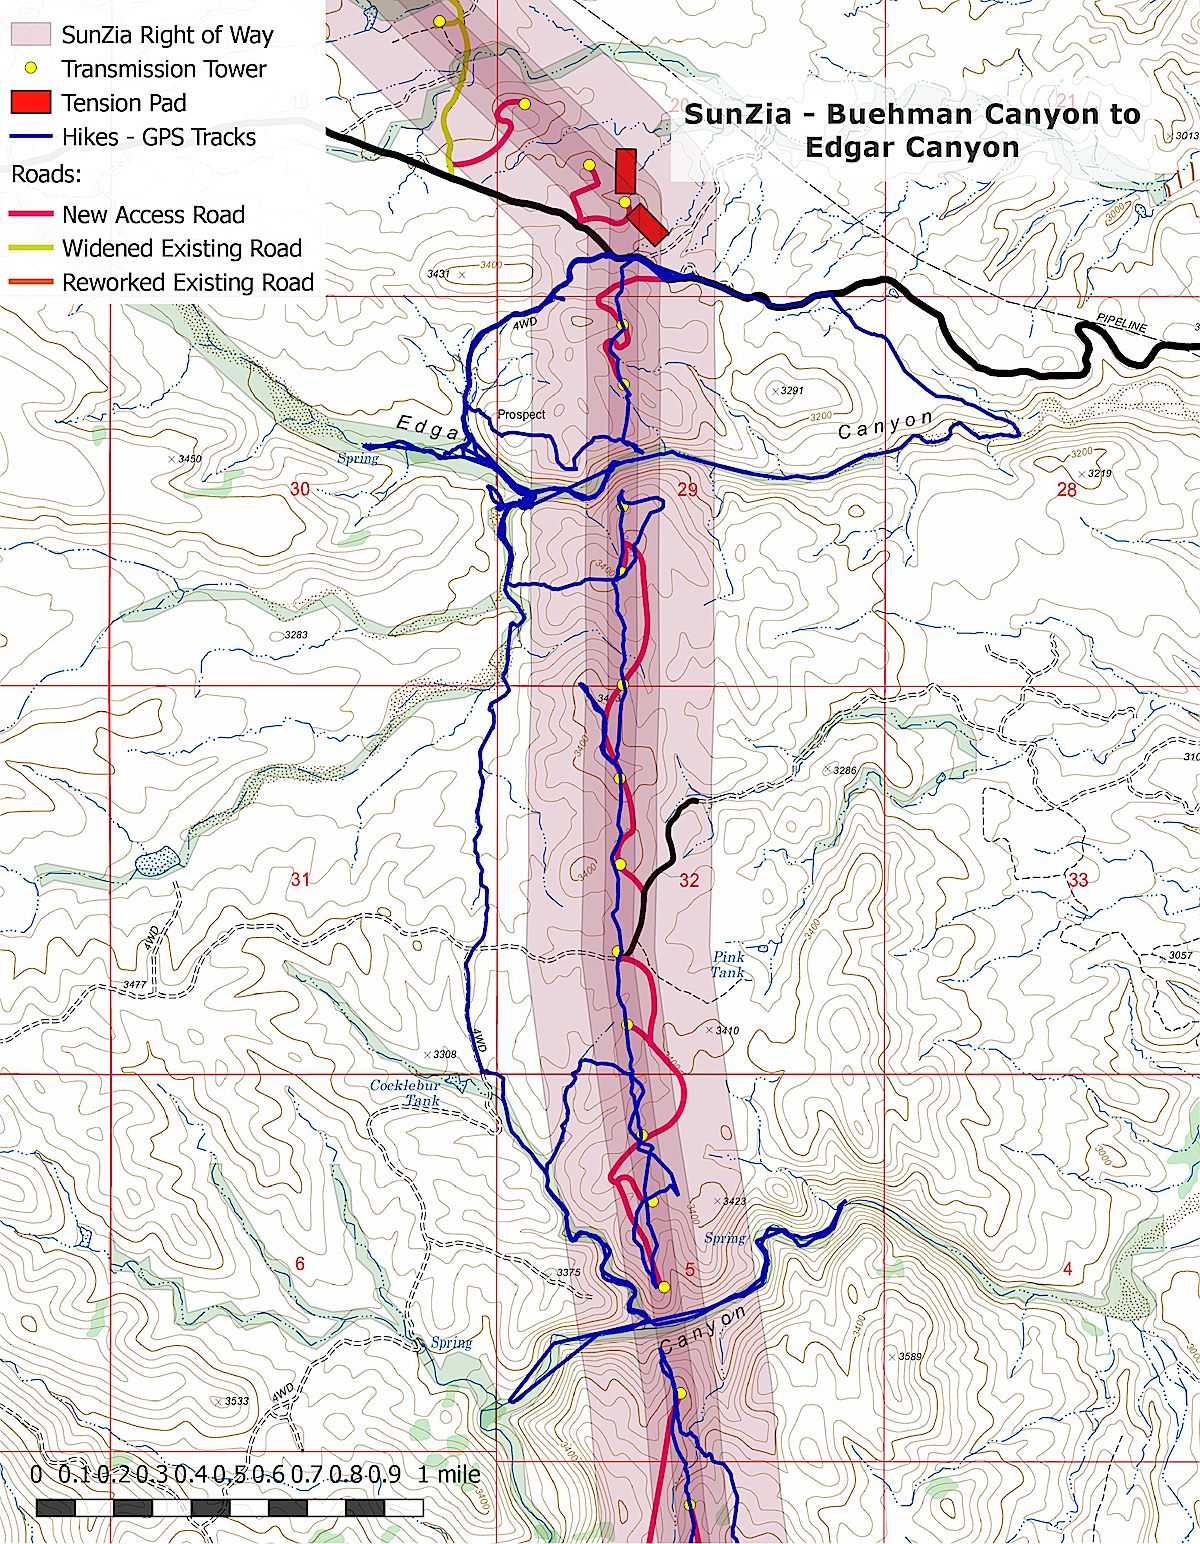 The proposed SunZia route from Buehman to Edgar Canyon - 12 towers (yellow dots), miles or new roads plowing thru the desert (red lines), 4 days of exploring the area (blue lines). March 2018.